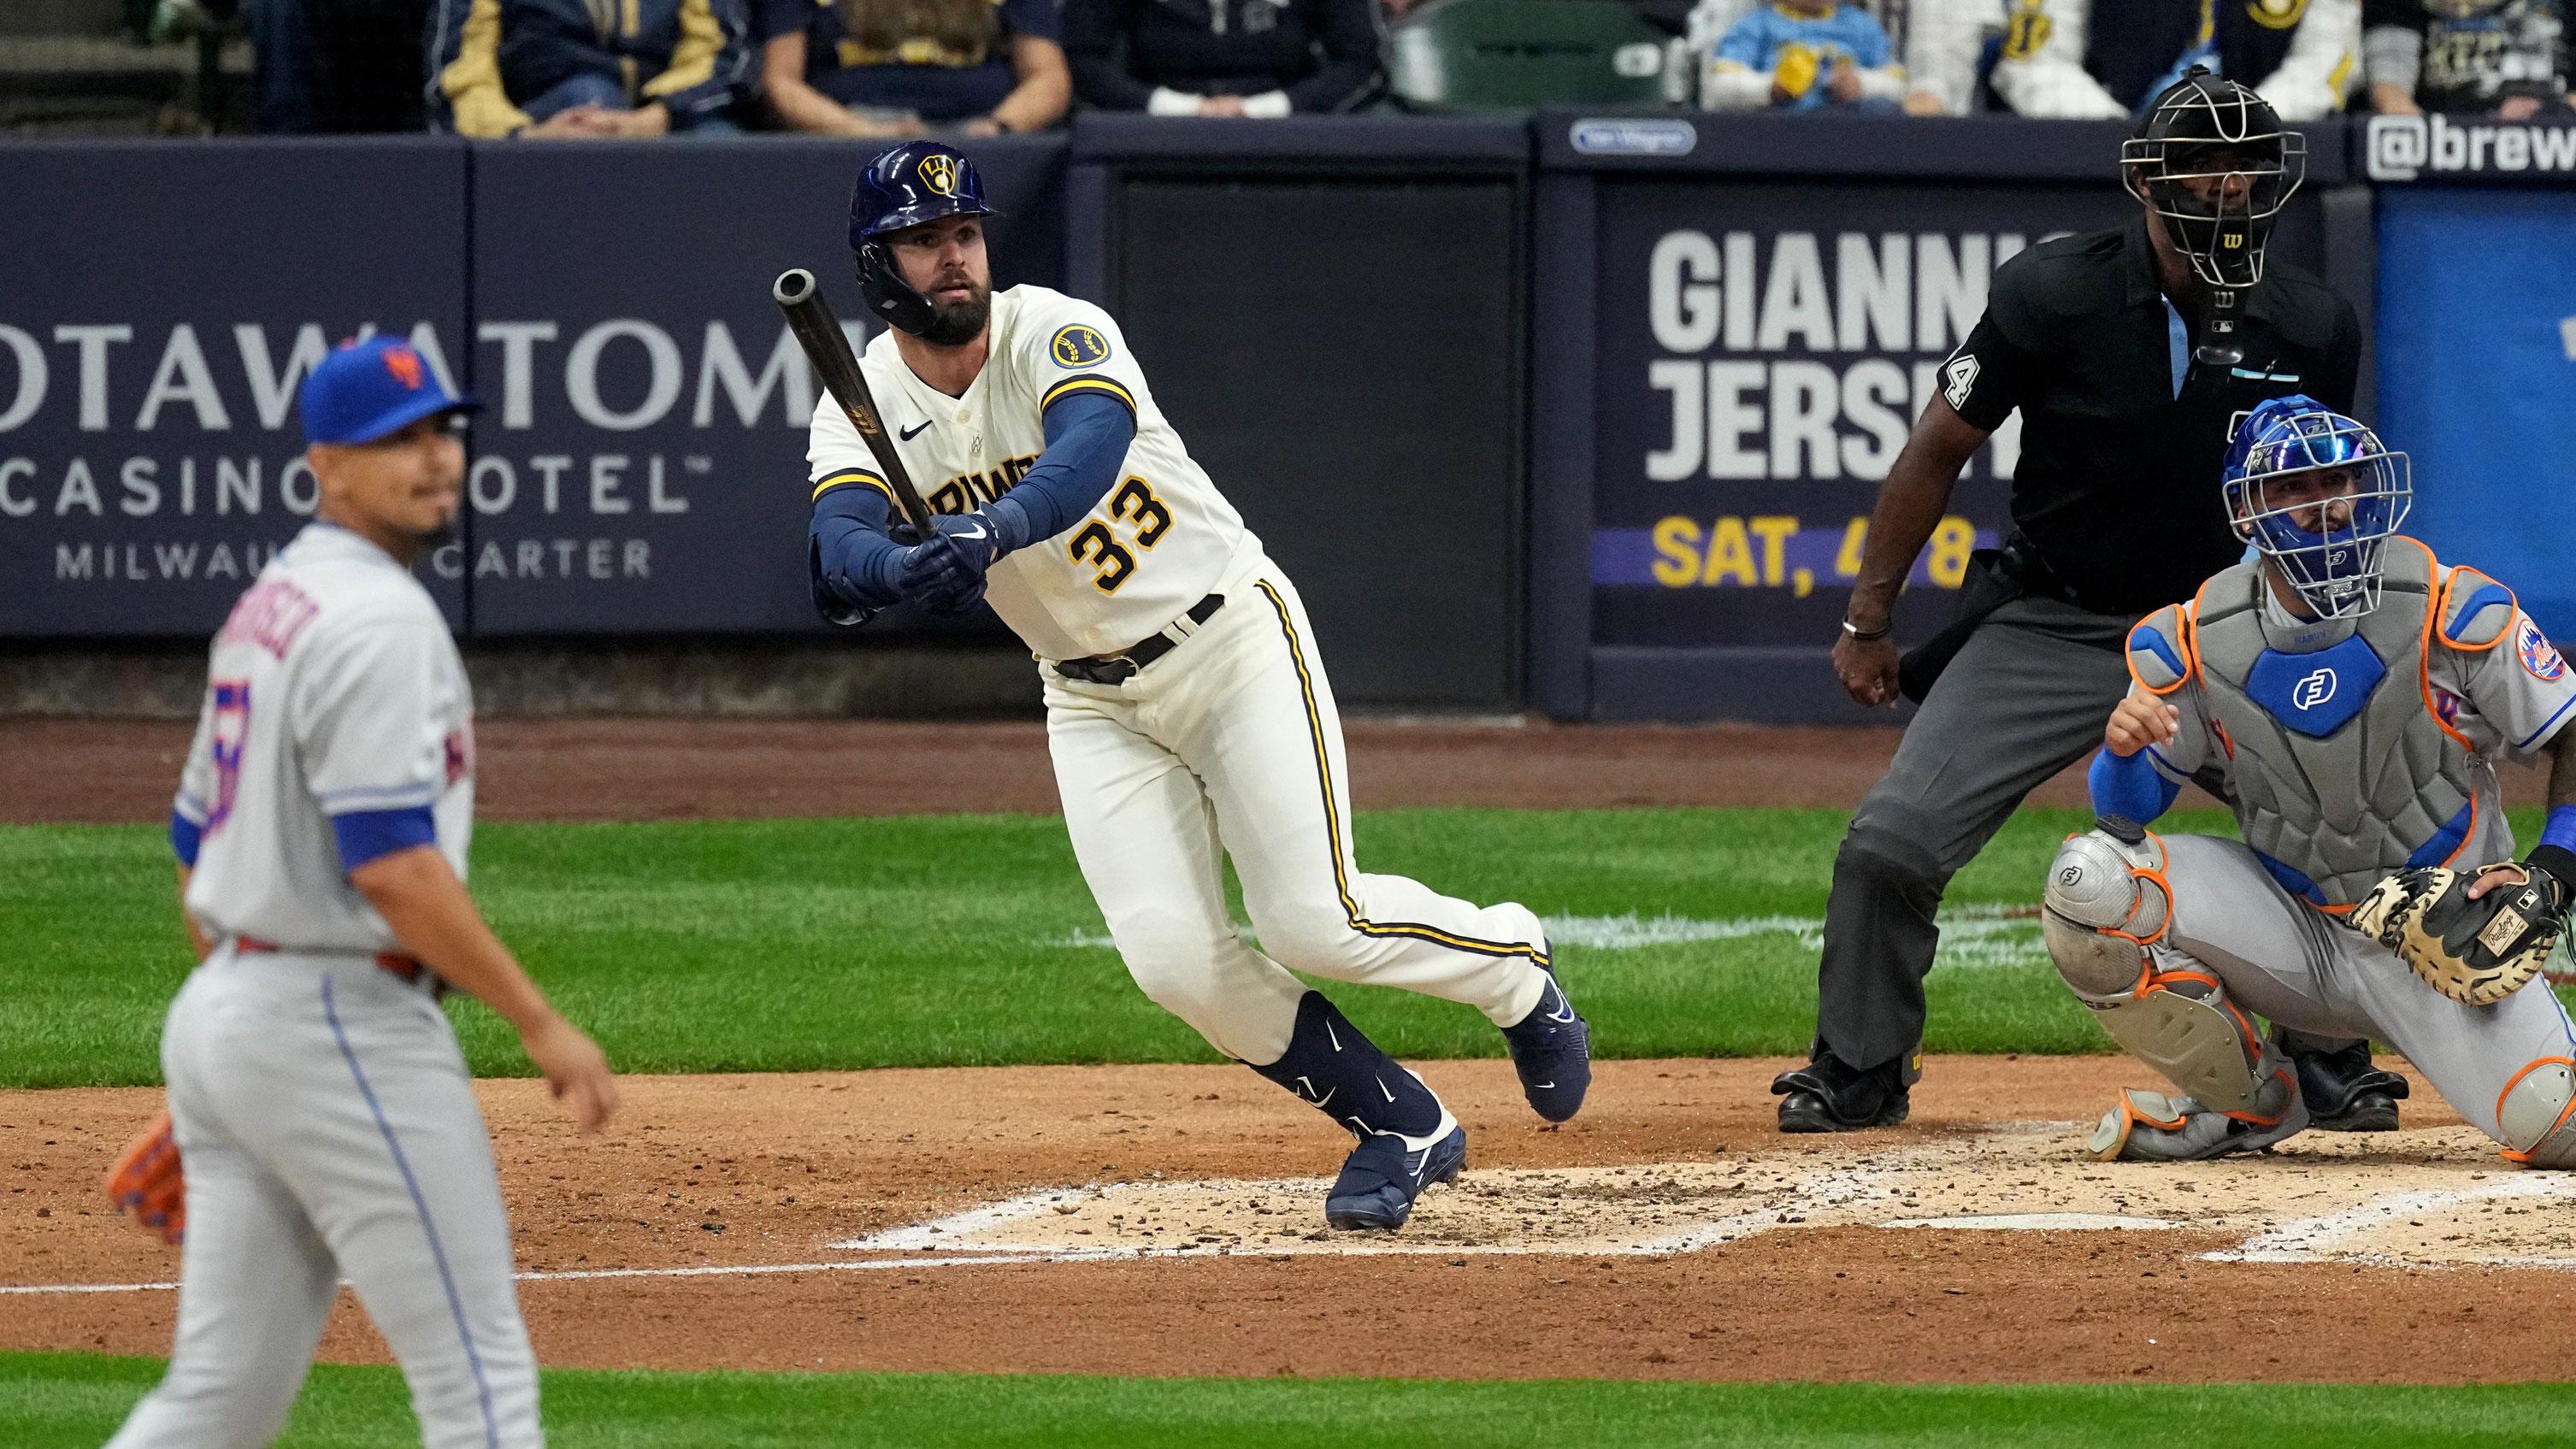 Milwaukee Brewers left fielder Jesse Winker (33) hits an RBI single during the third inning of their game against the New York Mets Monday, April 3, 2023 at American Family Field in Milwaukee, Wis / © MARK HOFFMAN/MILWAUKEE JOURNAL SENTINEL / USA TODAY NETWORK